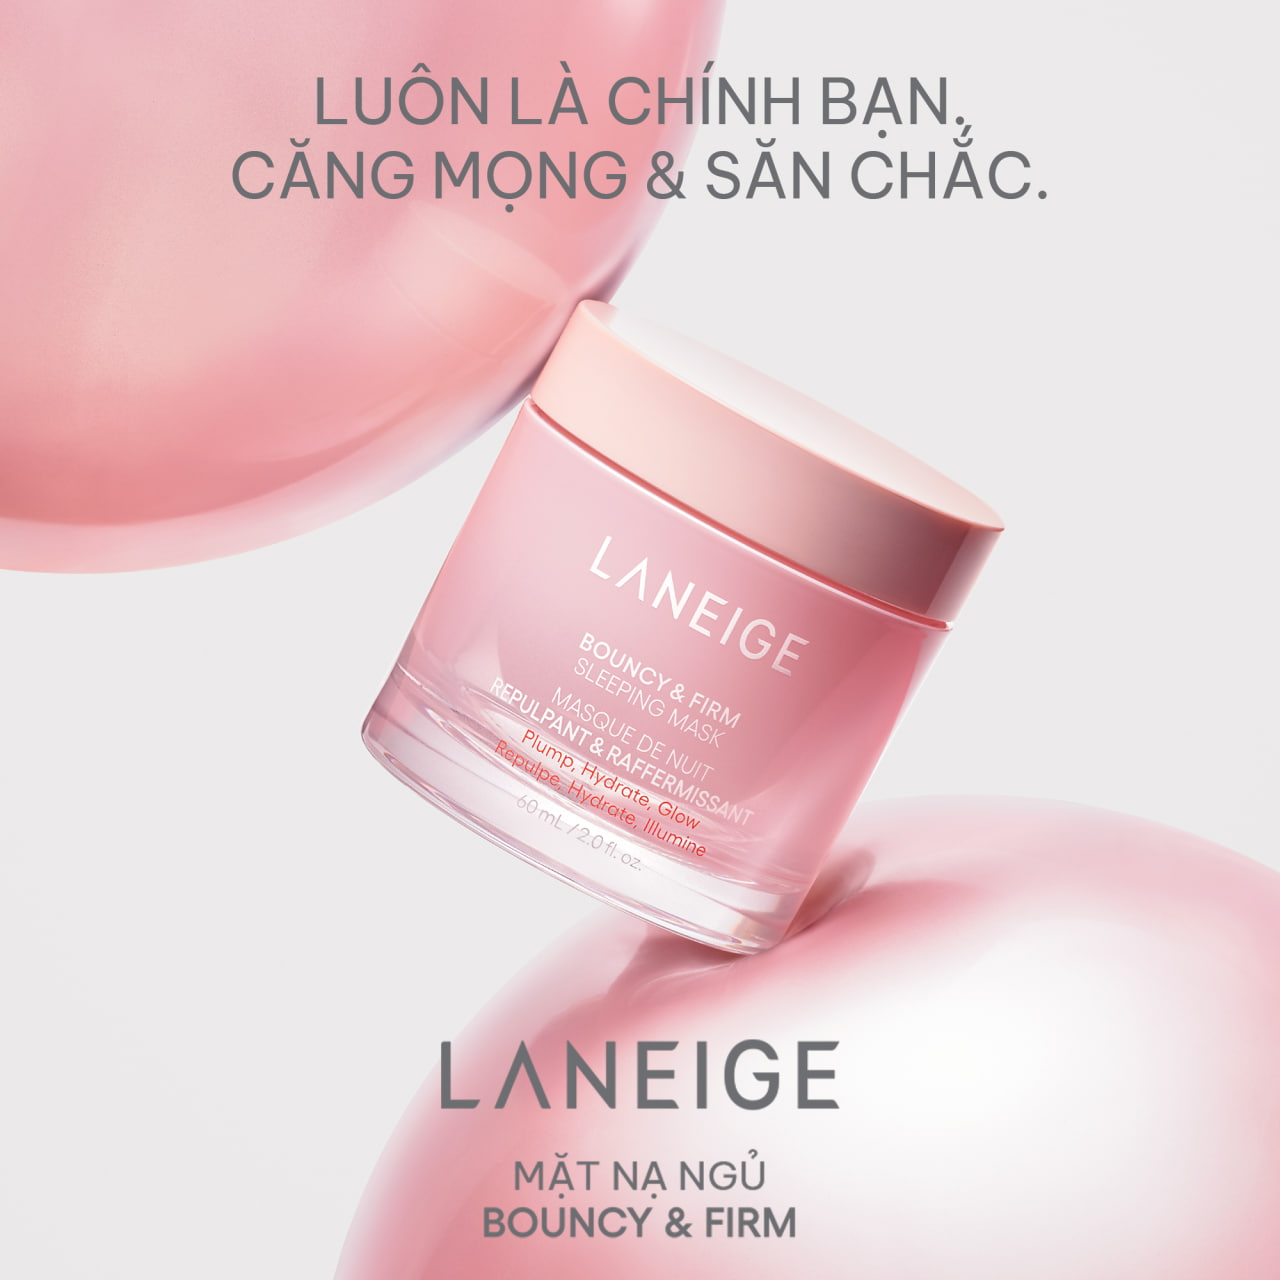 Mặt nạ ngủ Bouncy & Firm Sleeping Mask của LANEIGE